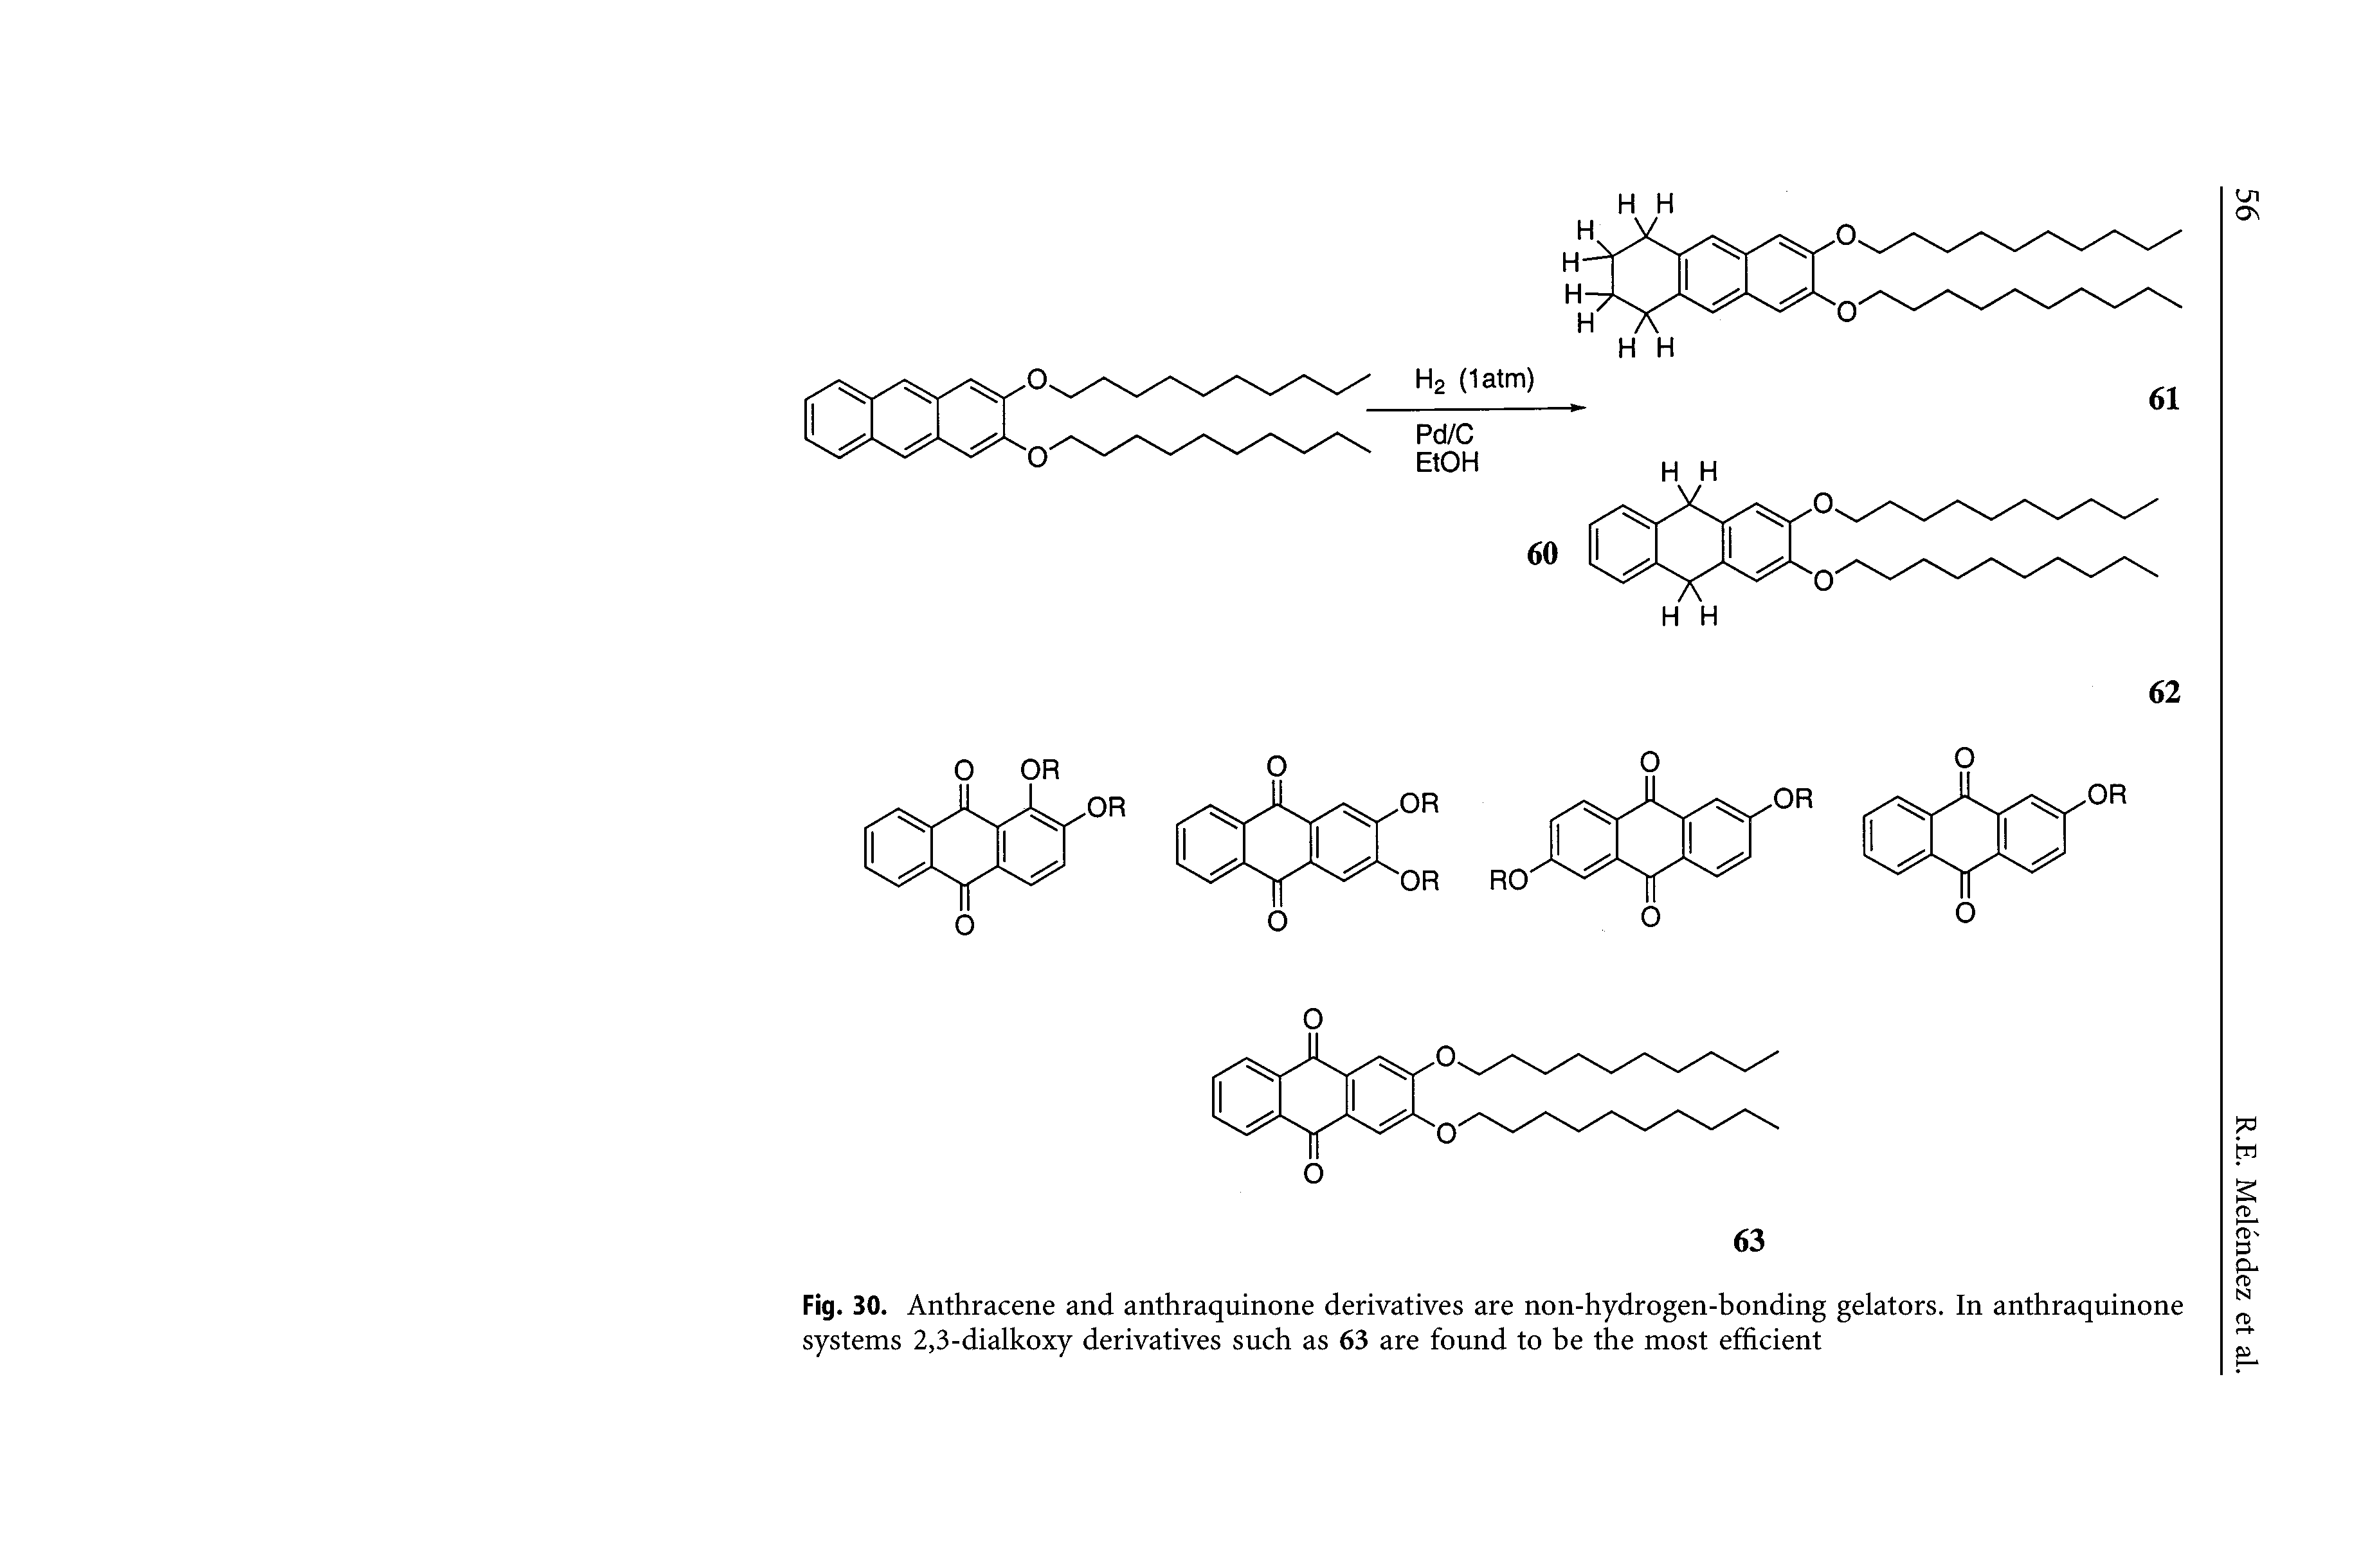 Fig. 30. Anthracene and anthraquinone derivatives are non-hydrogen-bonding gelators. In anthraquinone systems 2,3-dialkoxy derivatives such as 63 are found to be the most efficient...